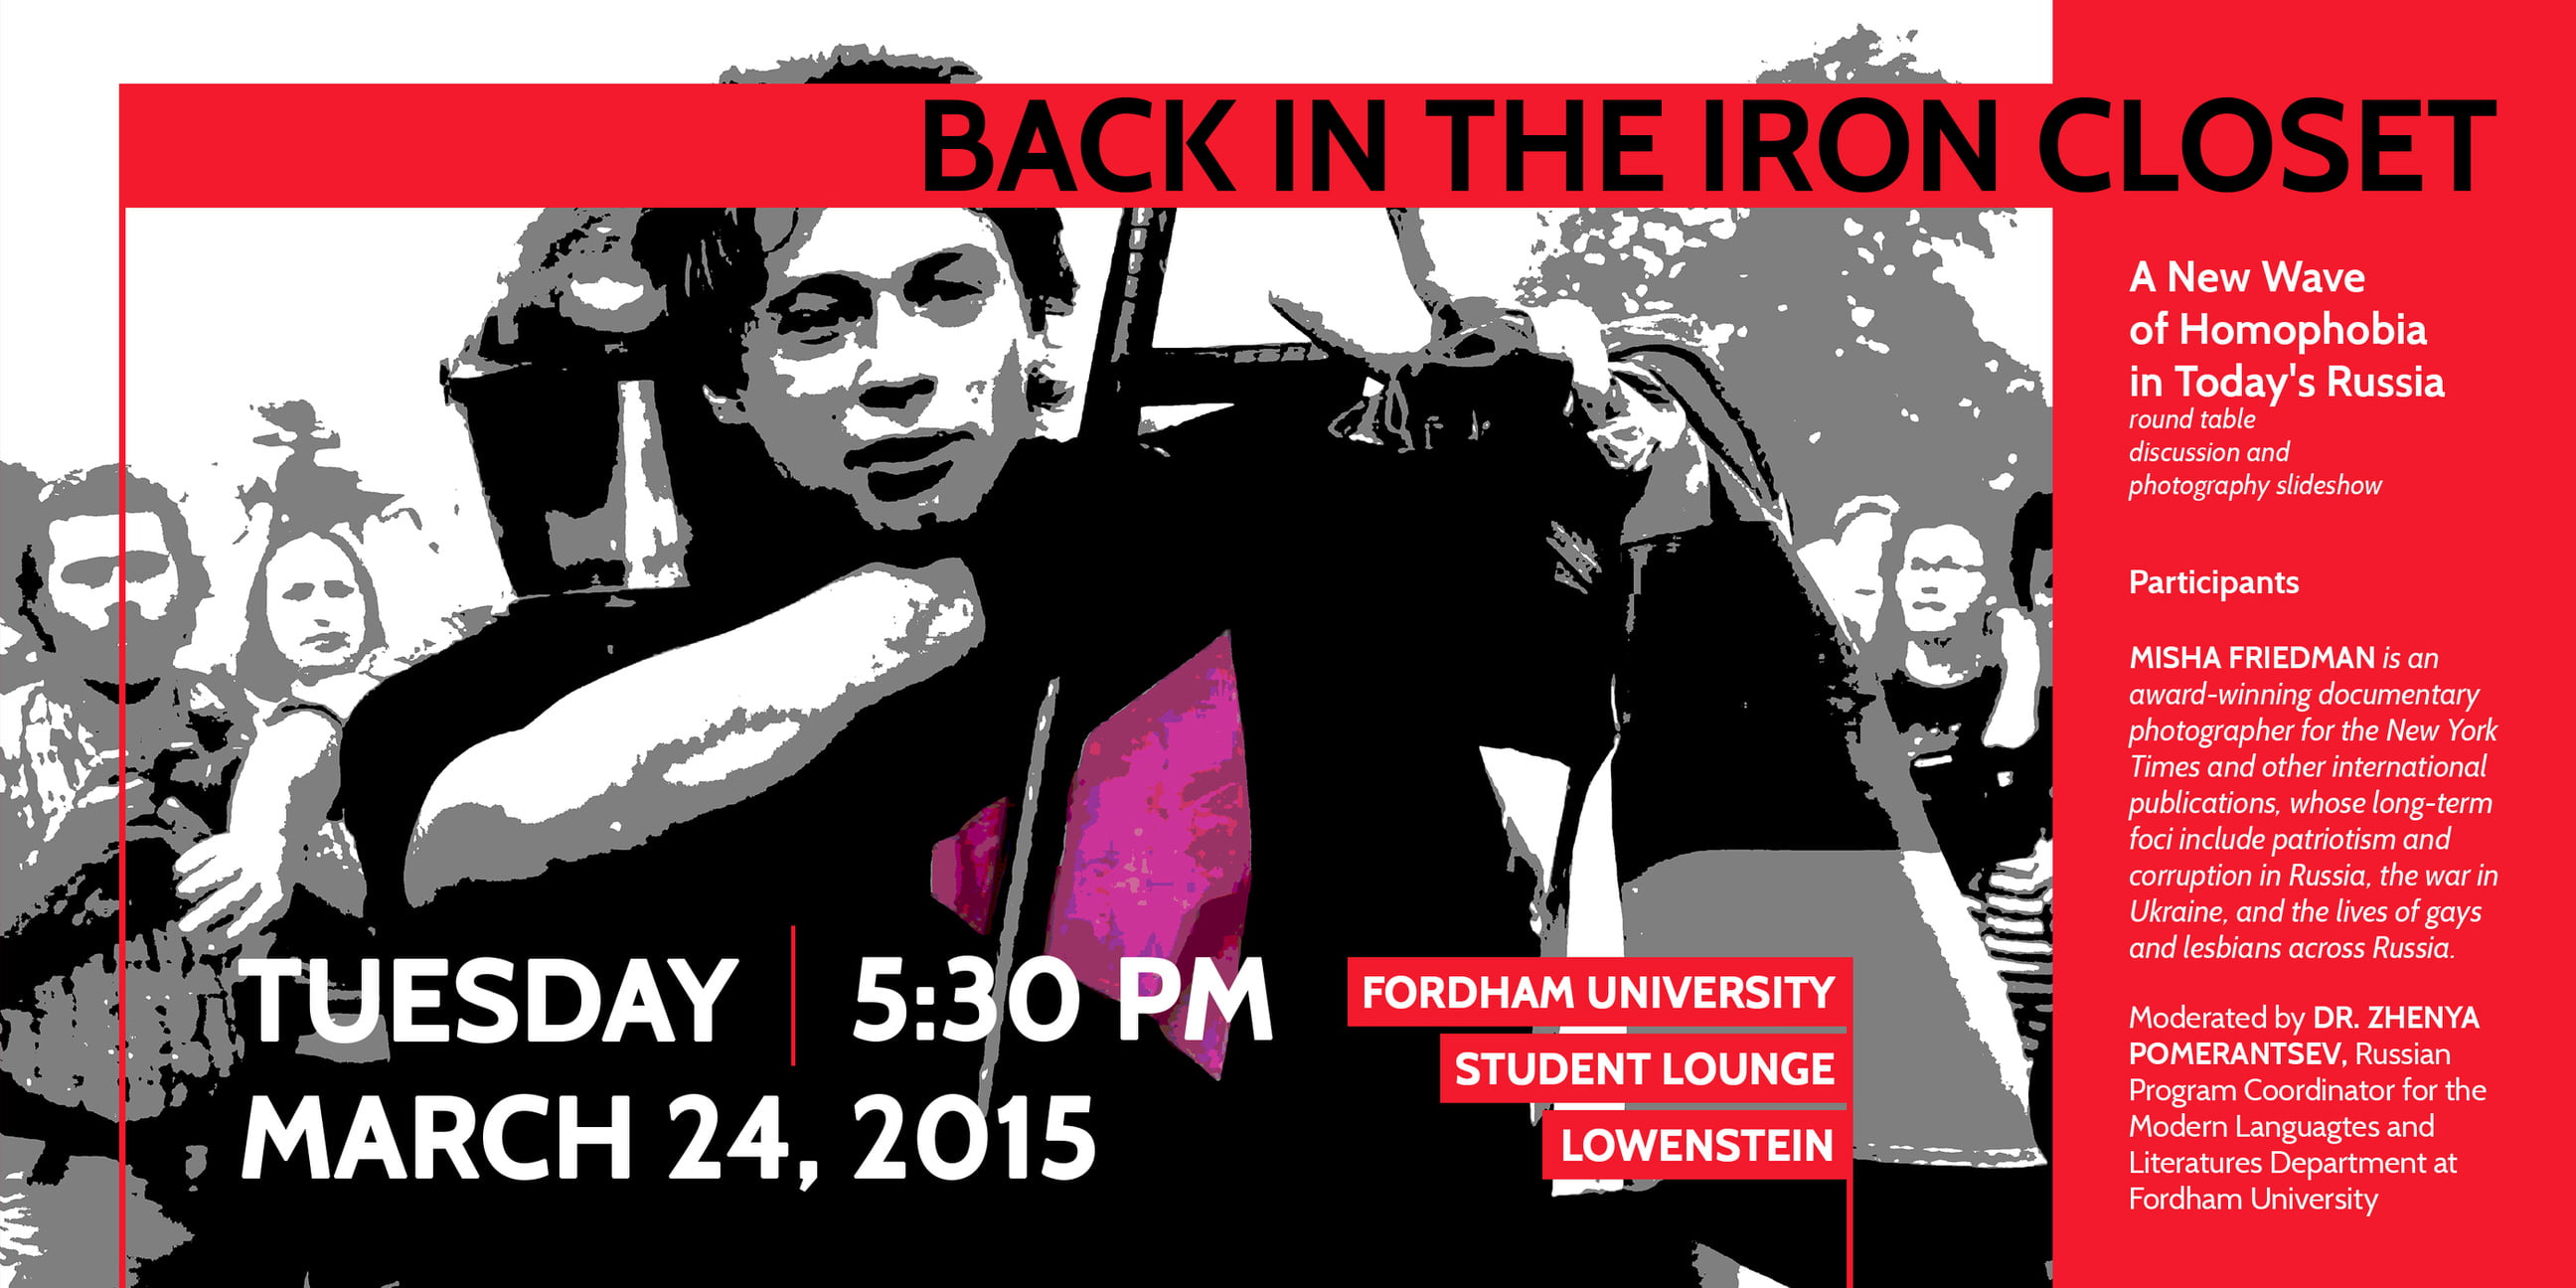 Back In The Iron Closet Round Table Discussion at Fordham University